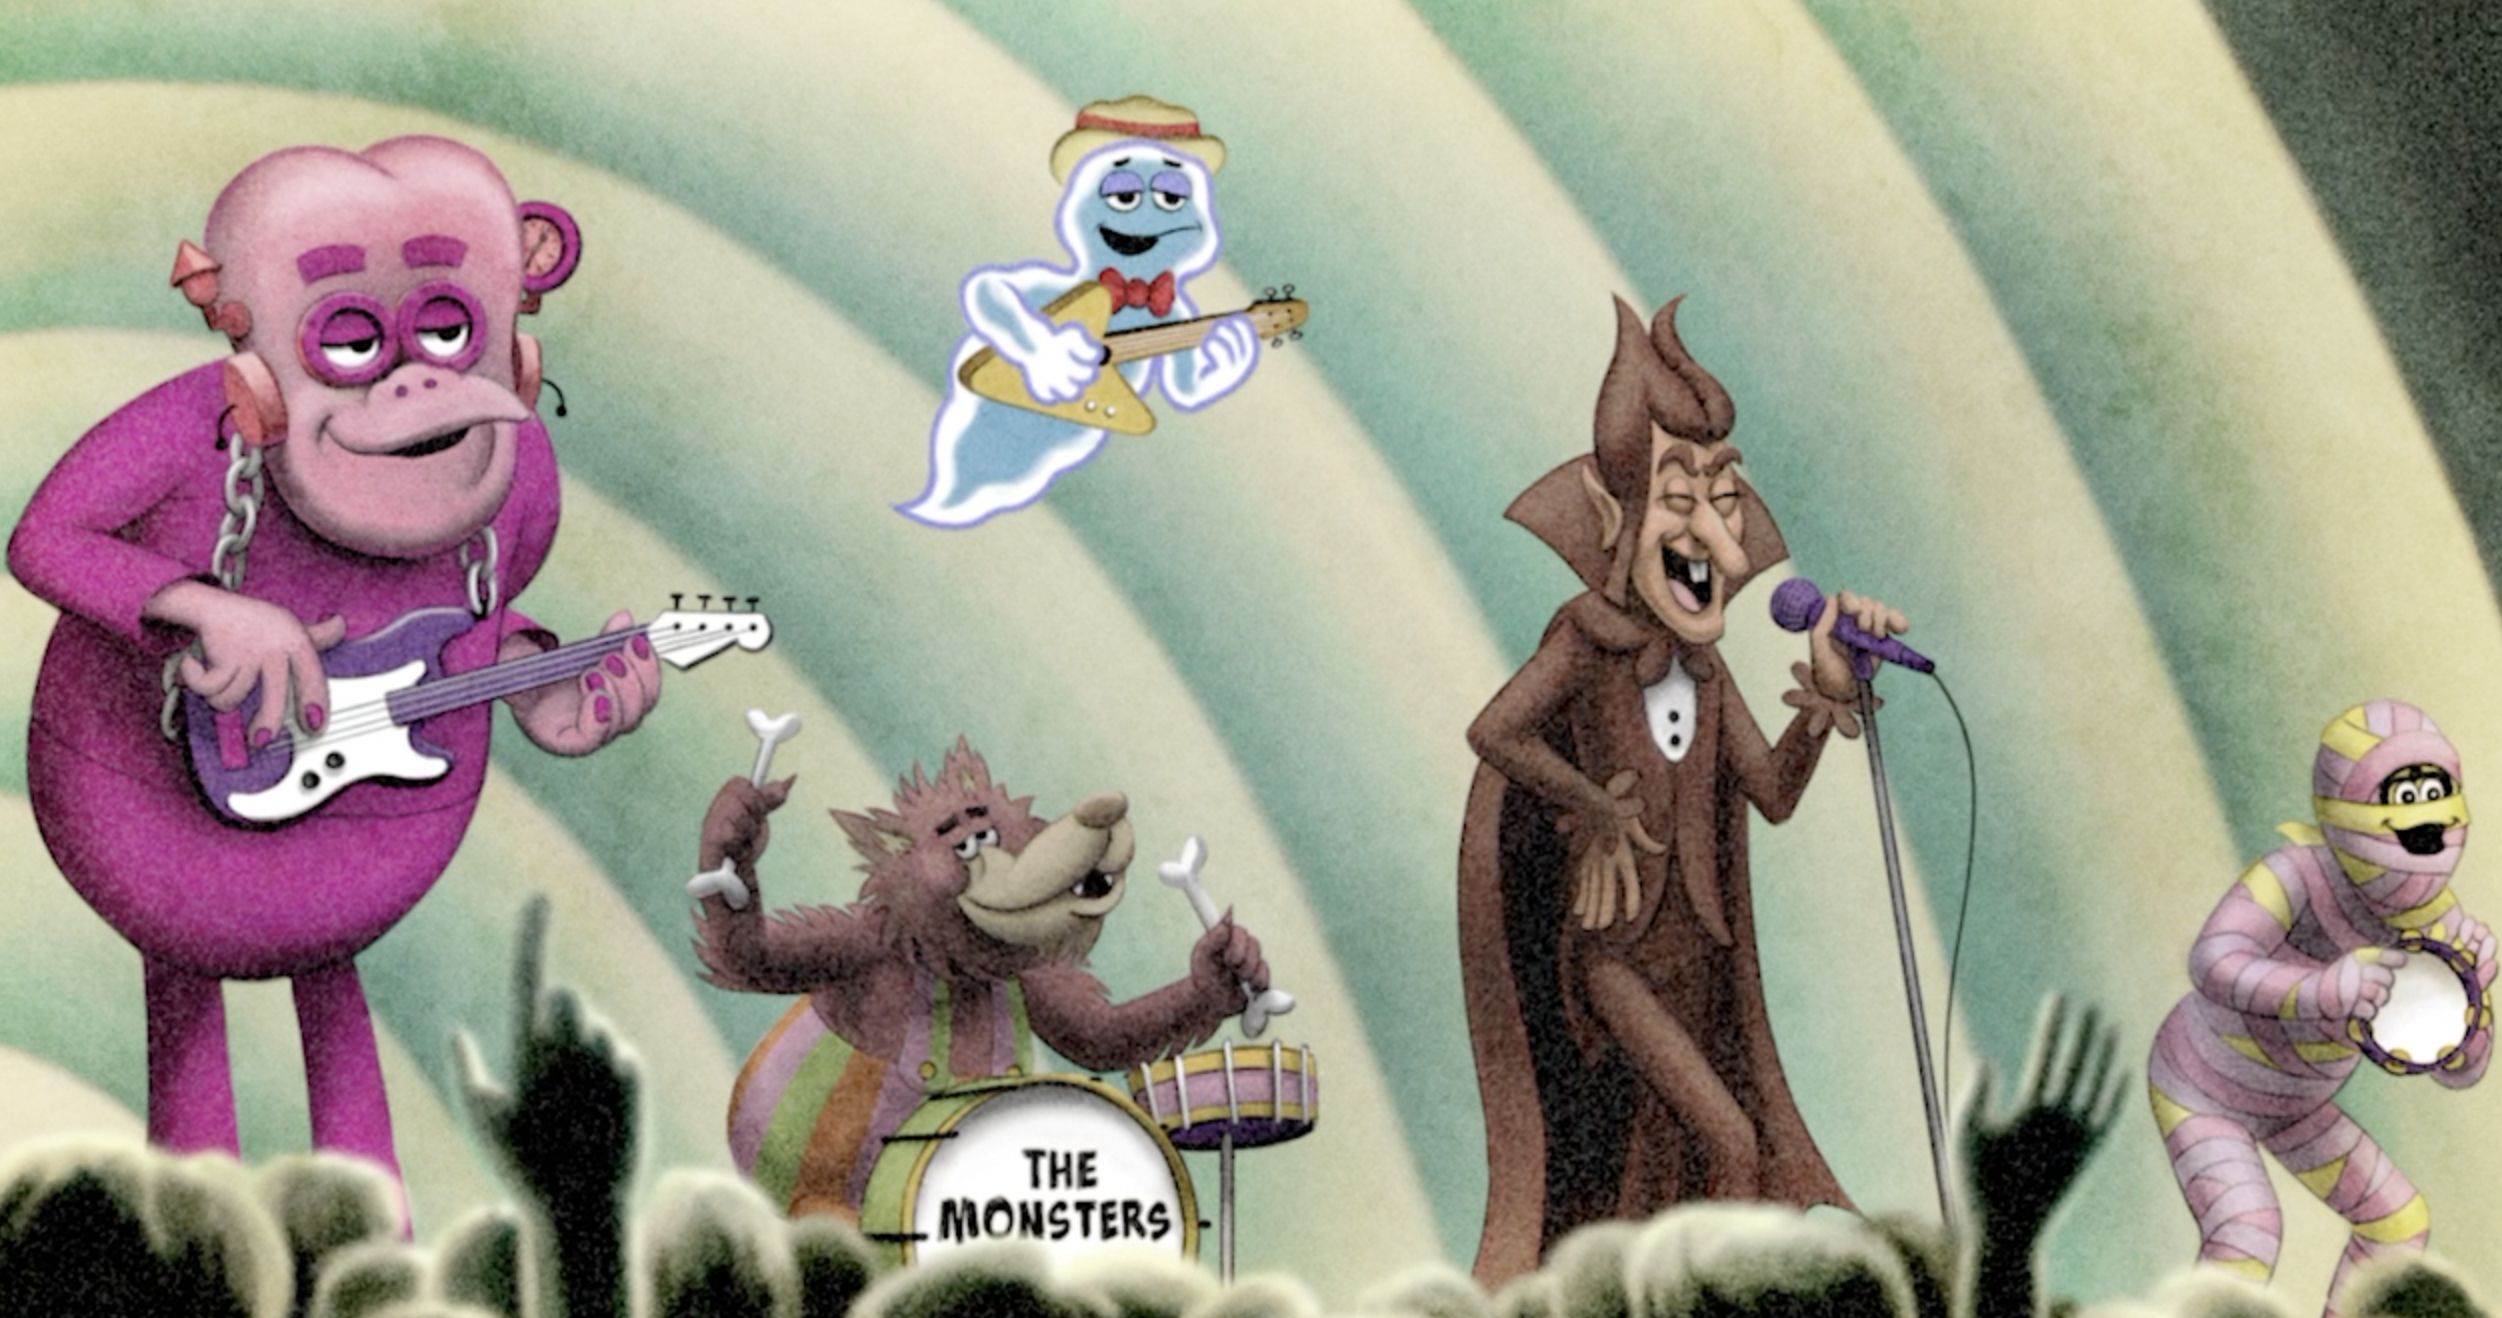 Monsters Cereals Unite for Monster Mash Official Song and Video